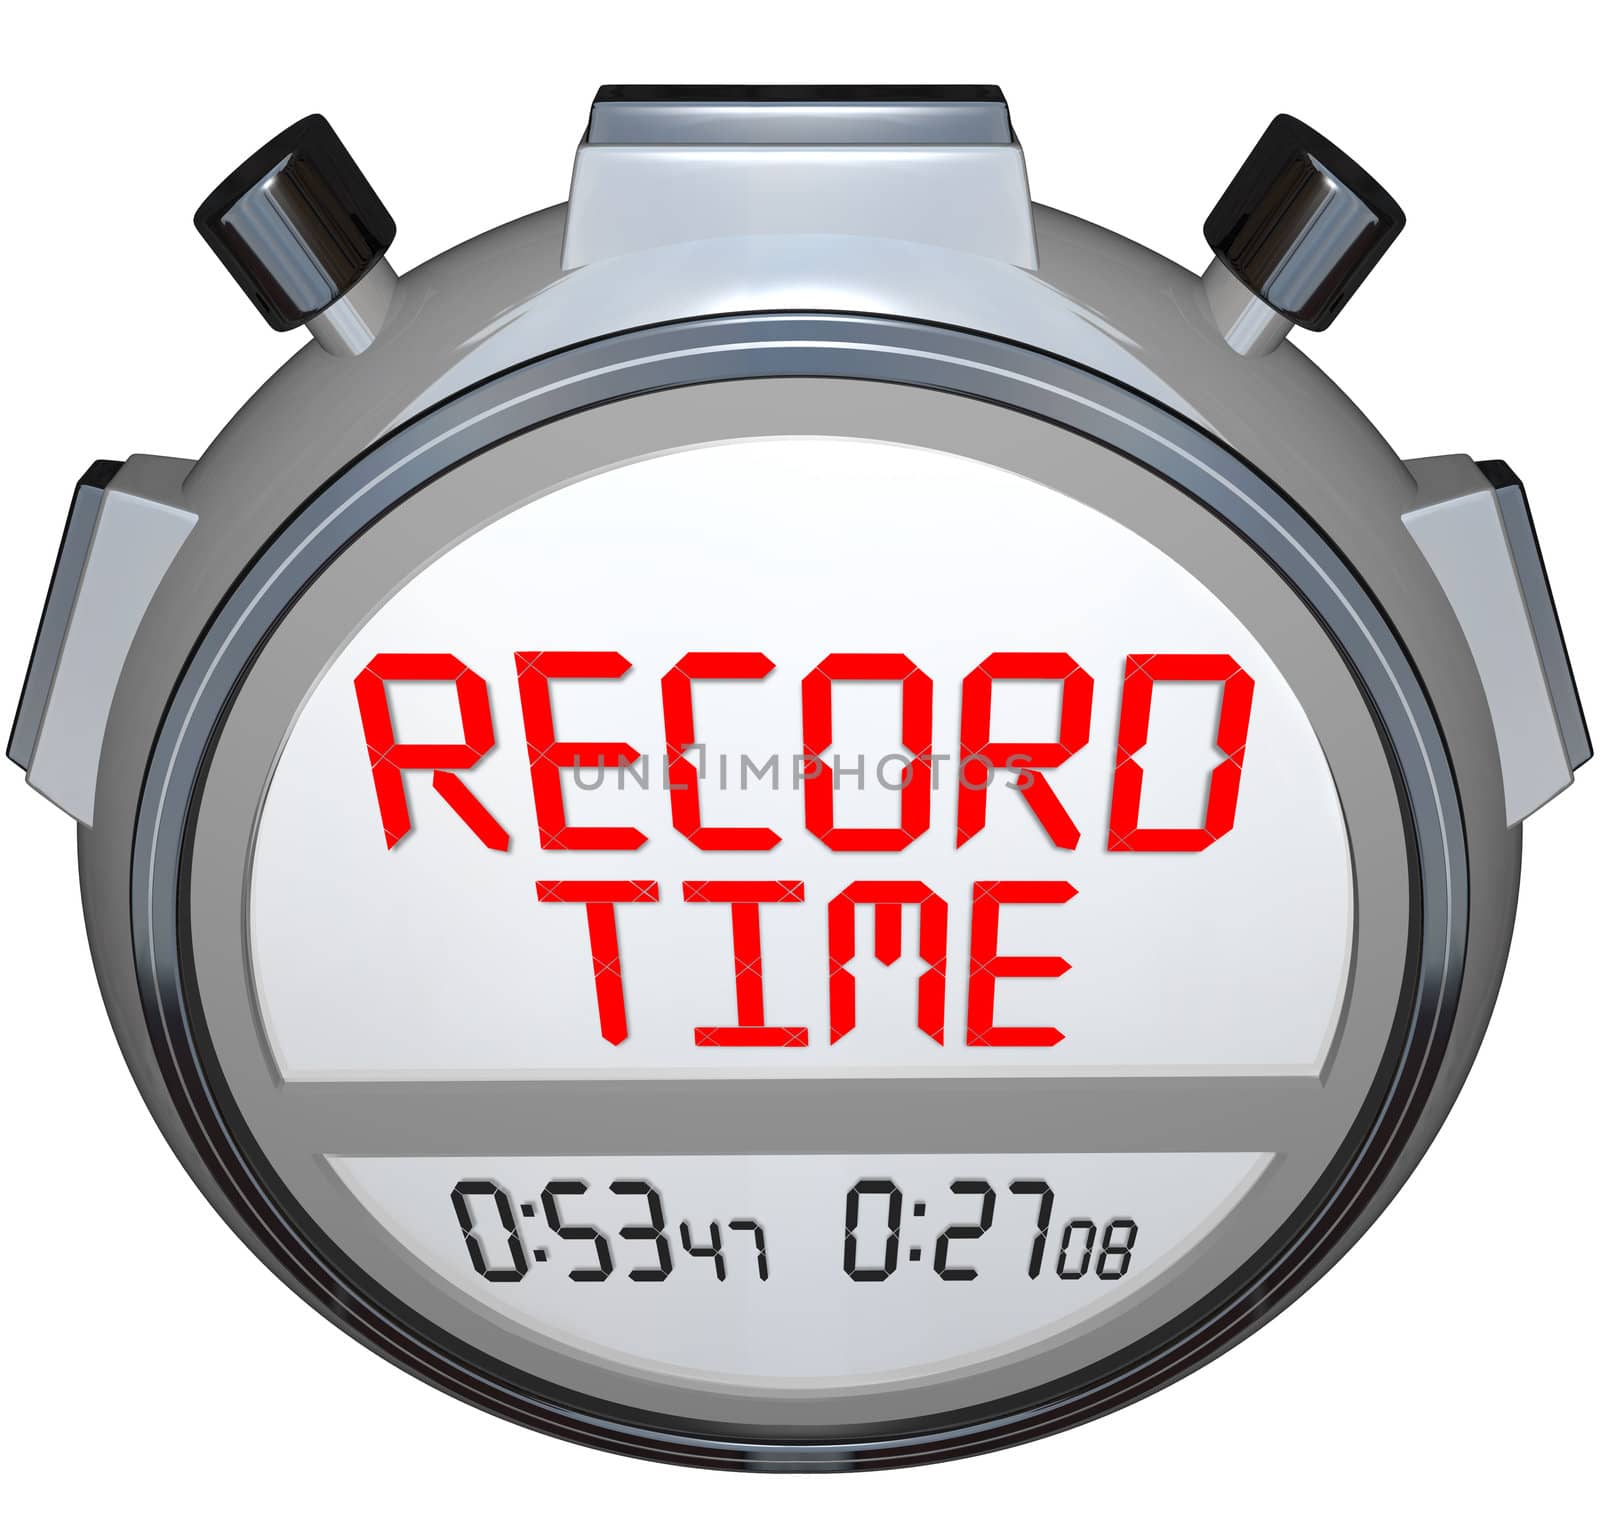 A stopwatch timer shows the words Record Time to illustrate that you have broken the previous record holder and have recorded teh best time ever